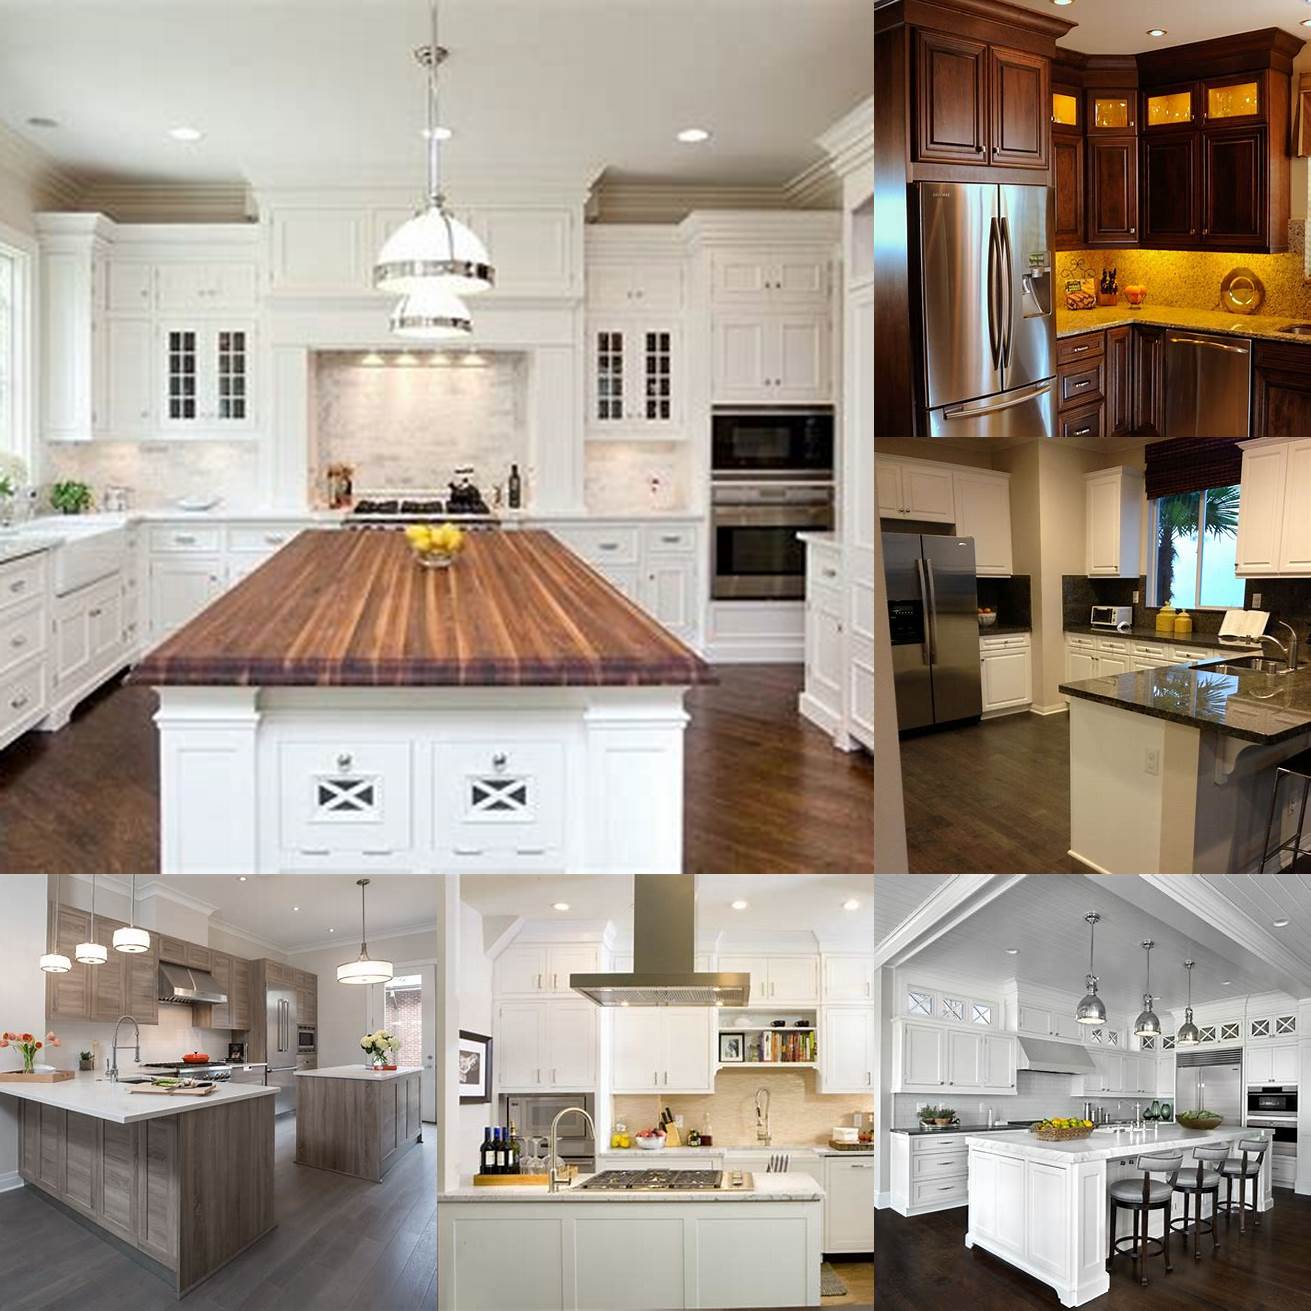 Functional kitchen cabinets and countertops